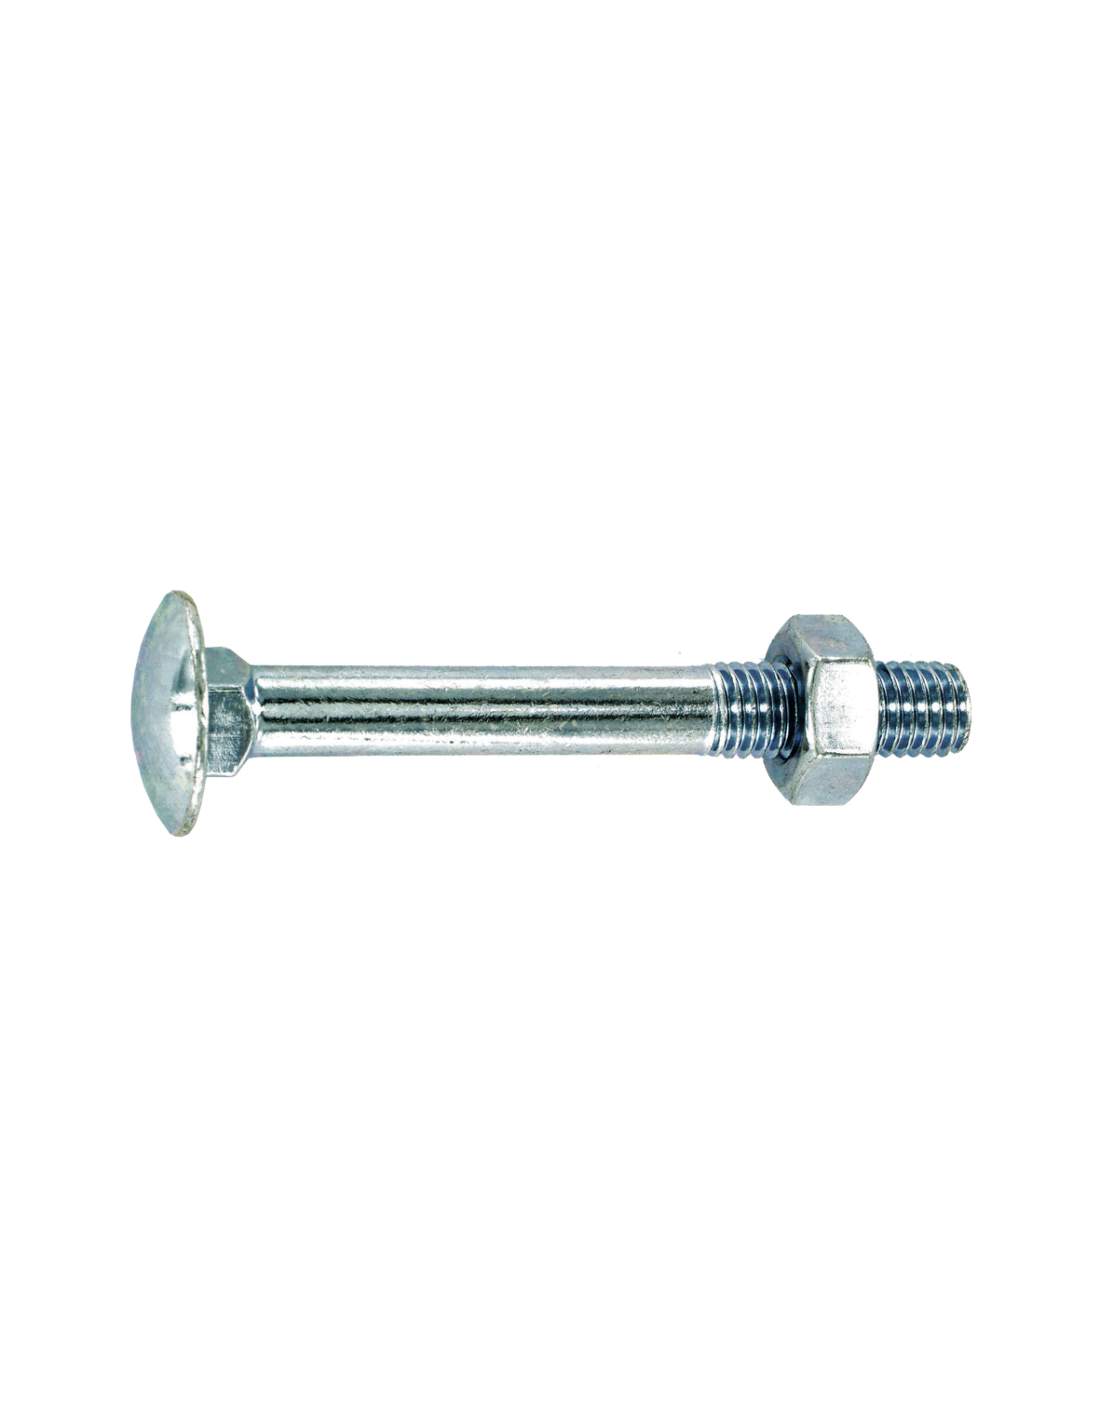  Zinc-plated steel round-head bolt with square collar 8x70mm, 3 pcs.